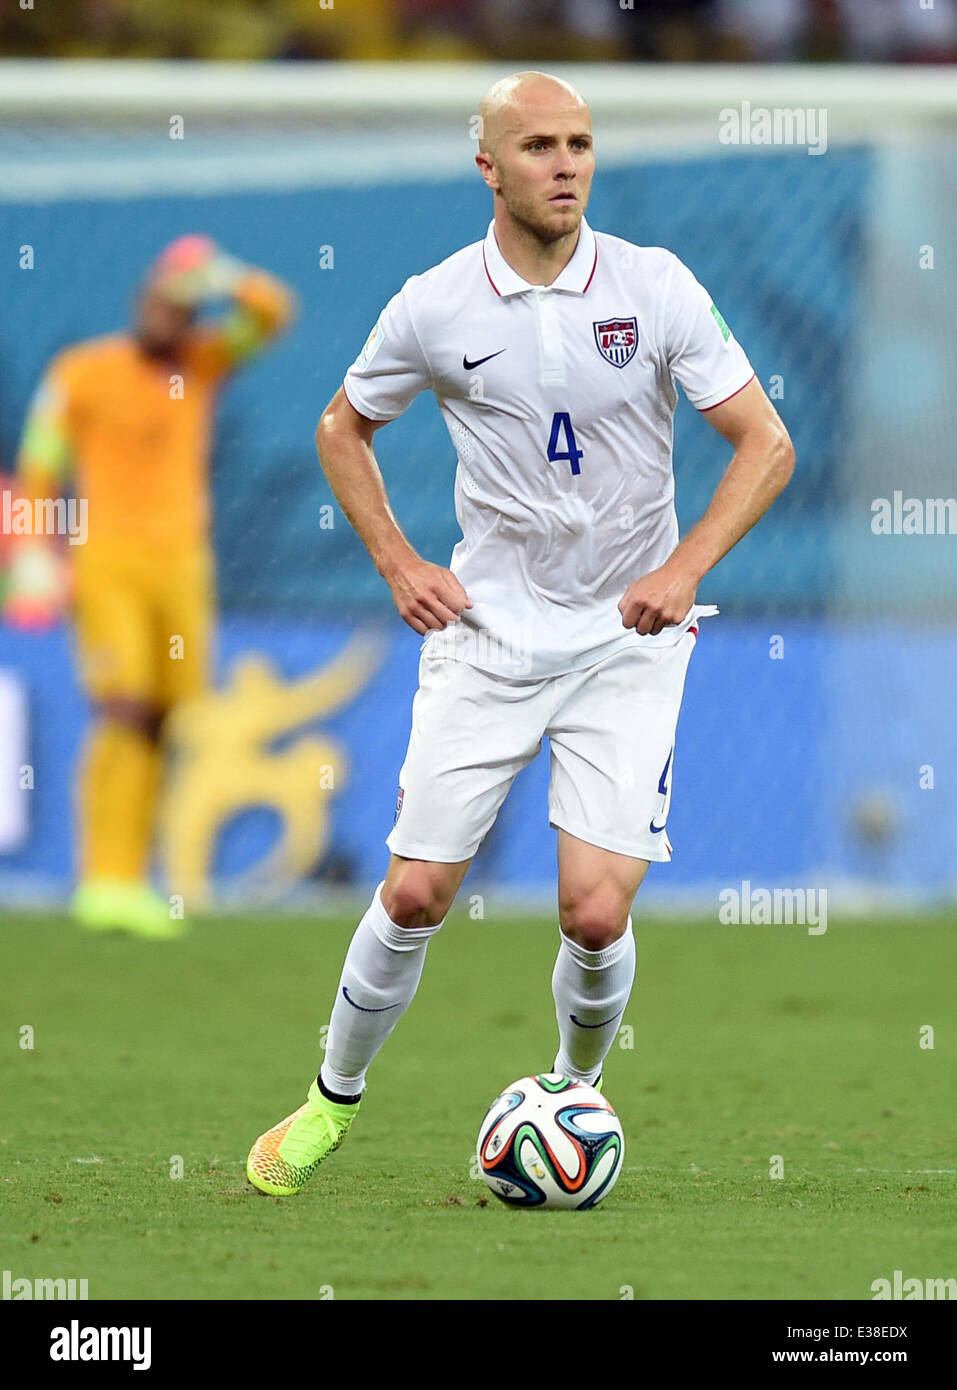 Manaus, Brazil. 22nd June, 2014. Michael Bradley of USA in action during the FIFA World Cup 2014 group G preliminary round match between the USA and Portugal at the Arena Amazonia Stadium in Manaus, Brazil, 22 June 2014. Photo: Marius Becker/dpa/Alamy Live News Stock Photo